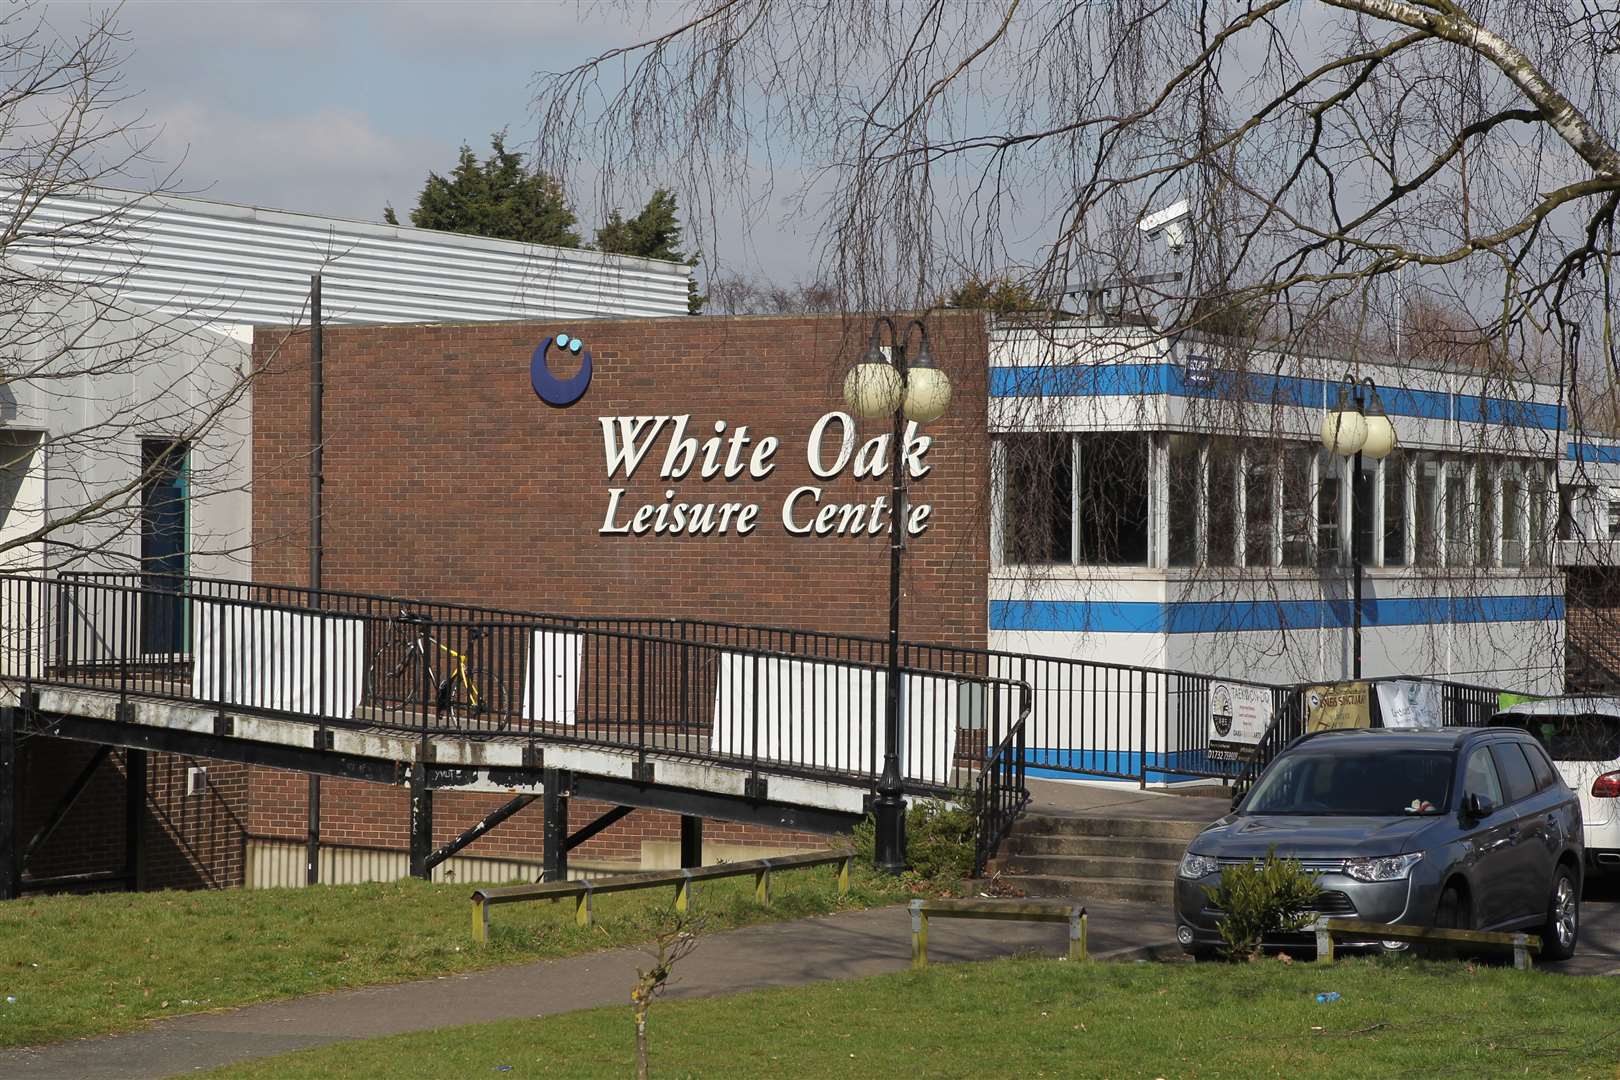 The old White Oak Leisure Centre in Swanley is being replaced in a £20m build